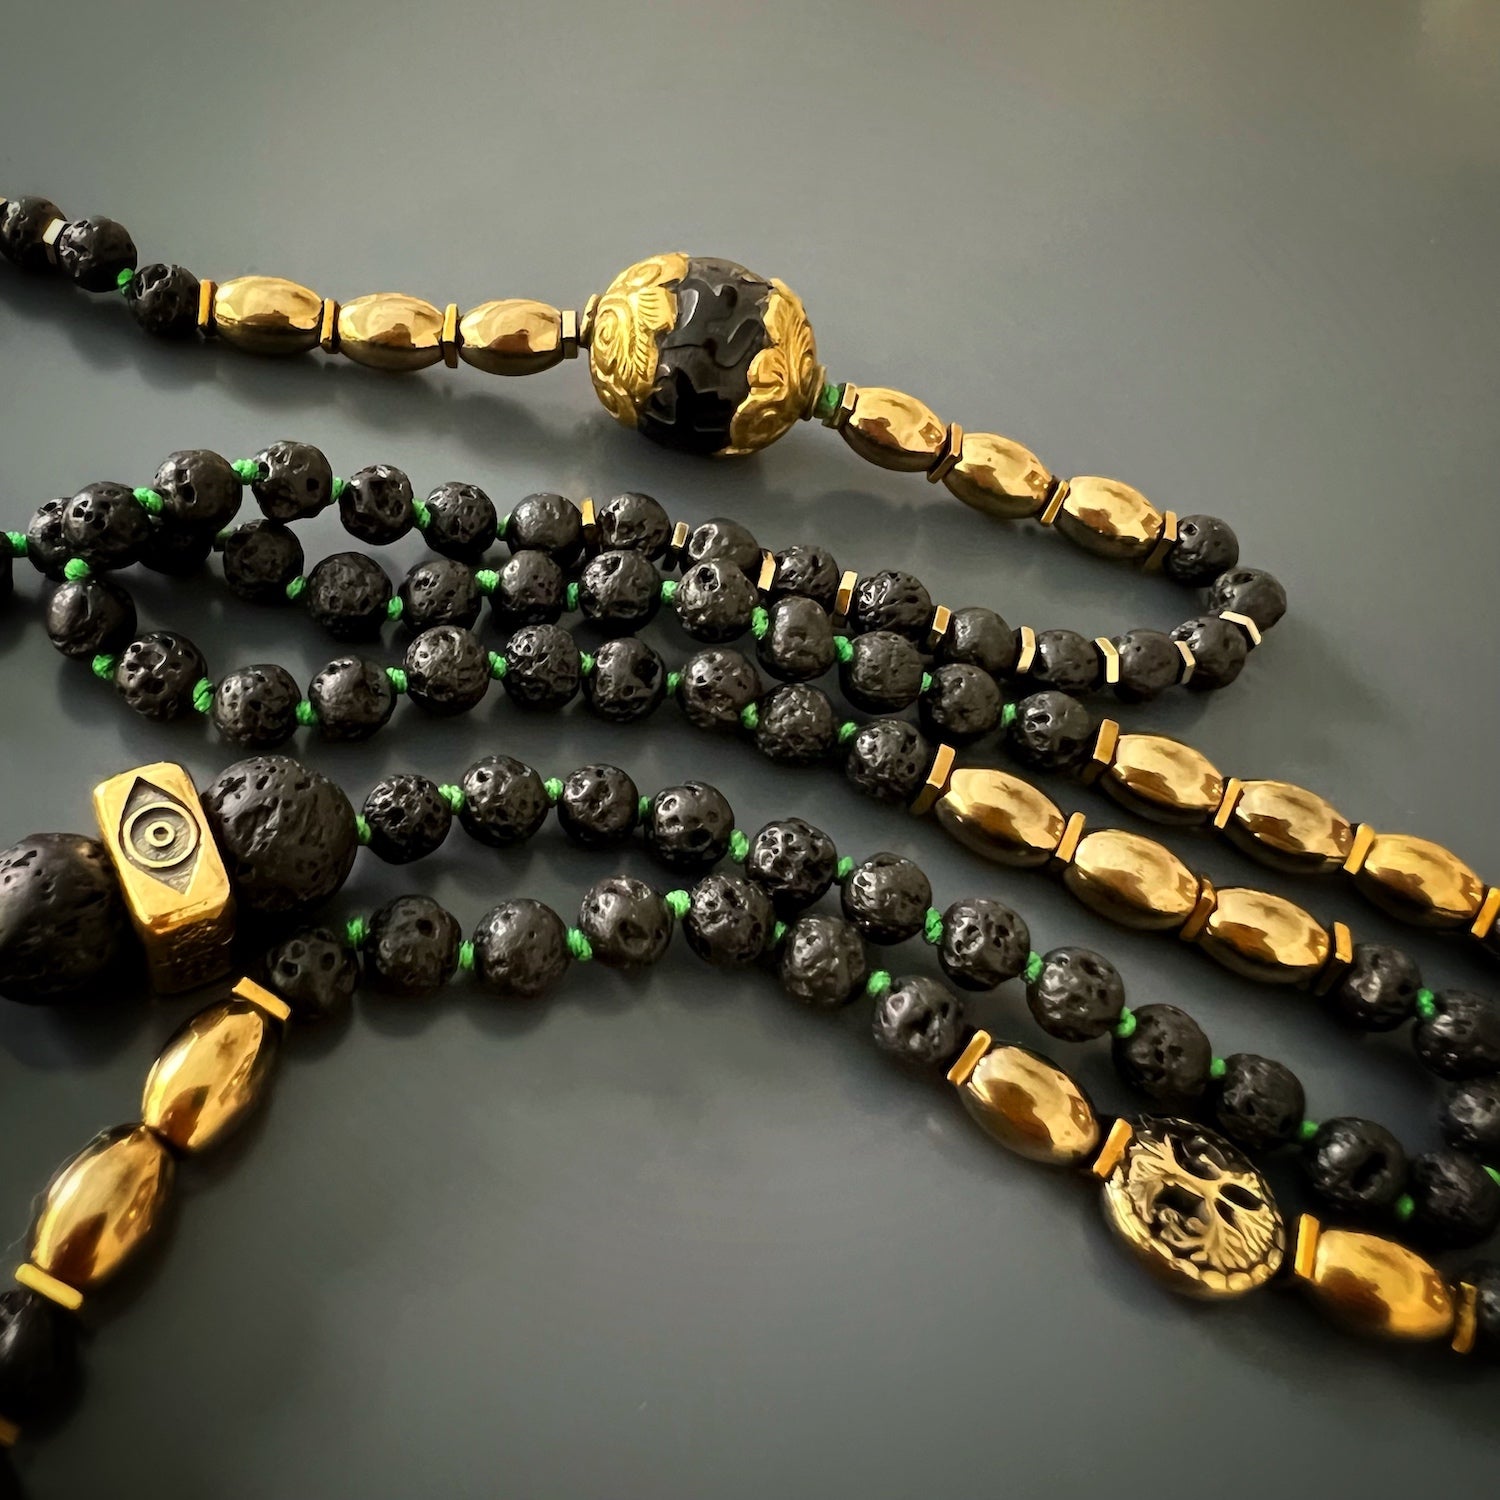 Beautiful and Meaningful Black Queen Nefertiti Necklace with Hematite Stone Beads